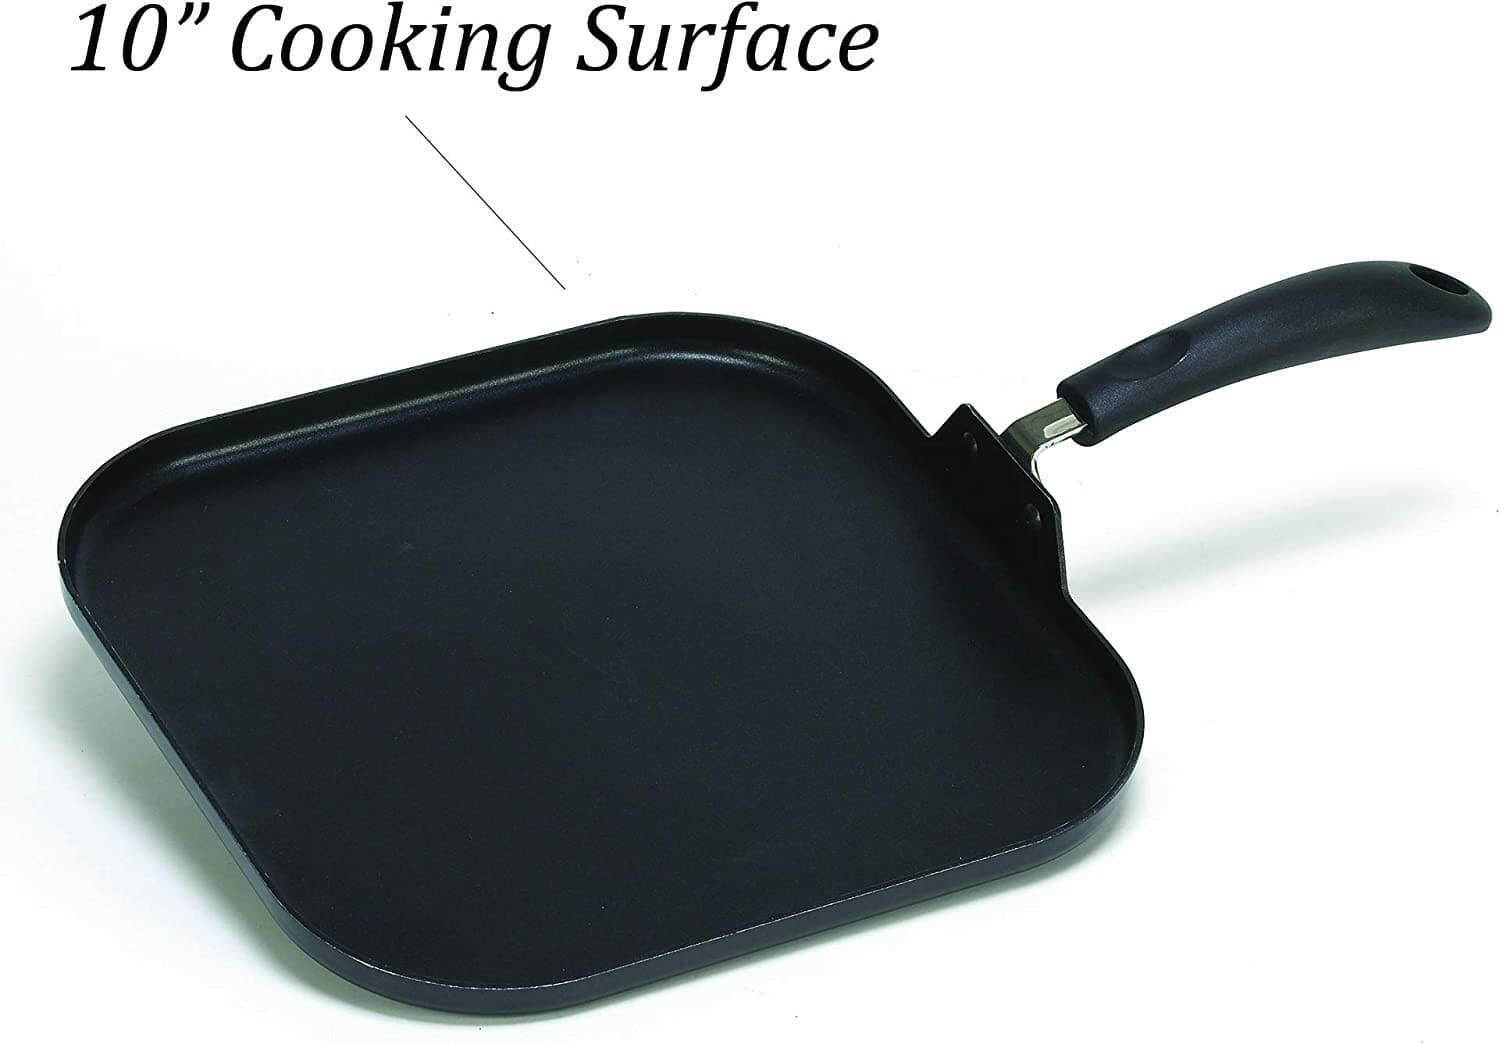 Imusa Chef Square Griddle 10.5" 2.0mm.